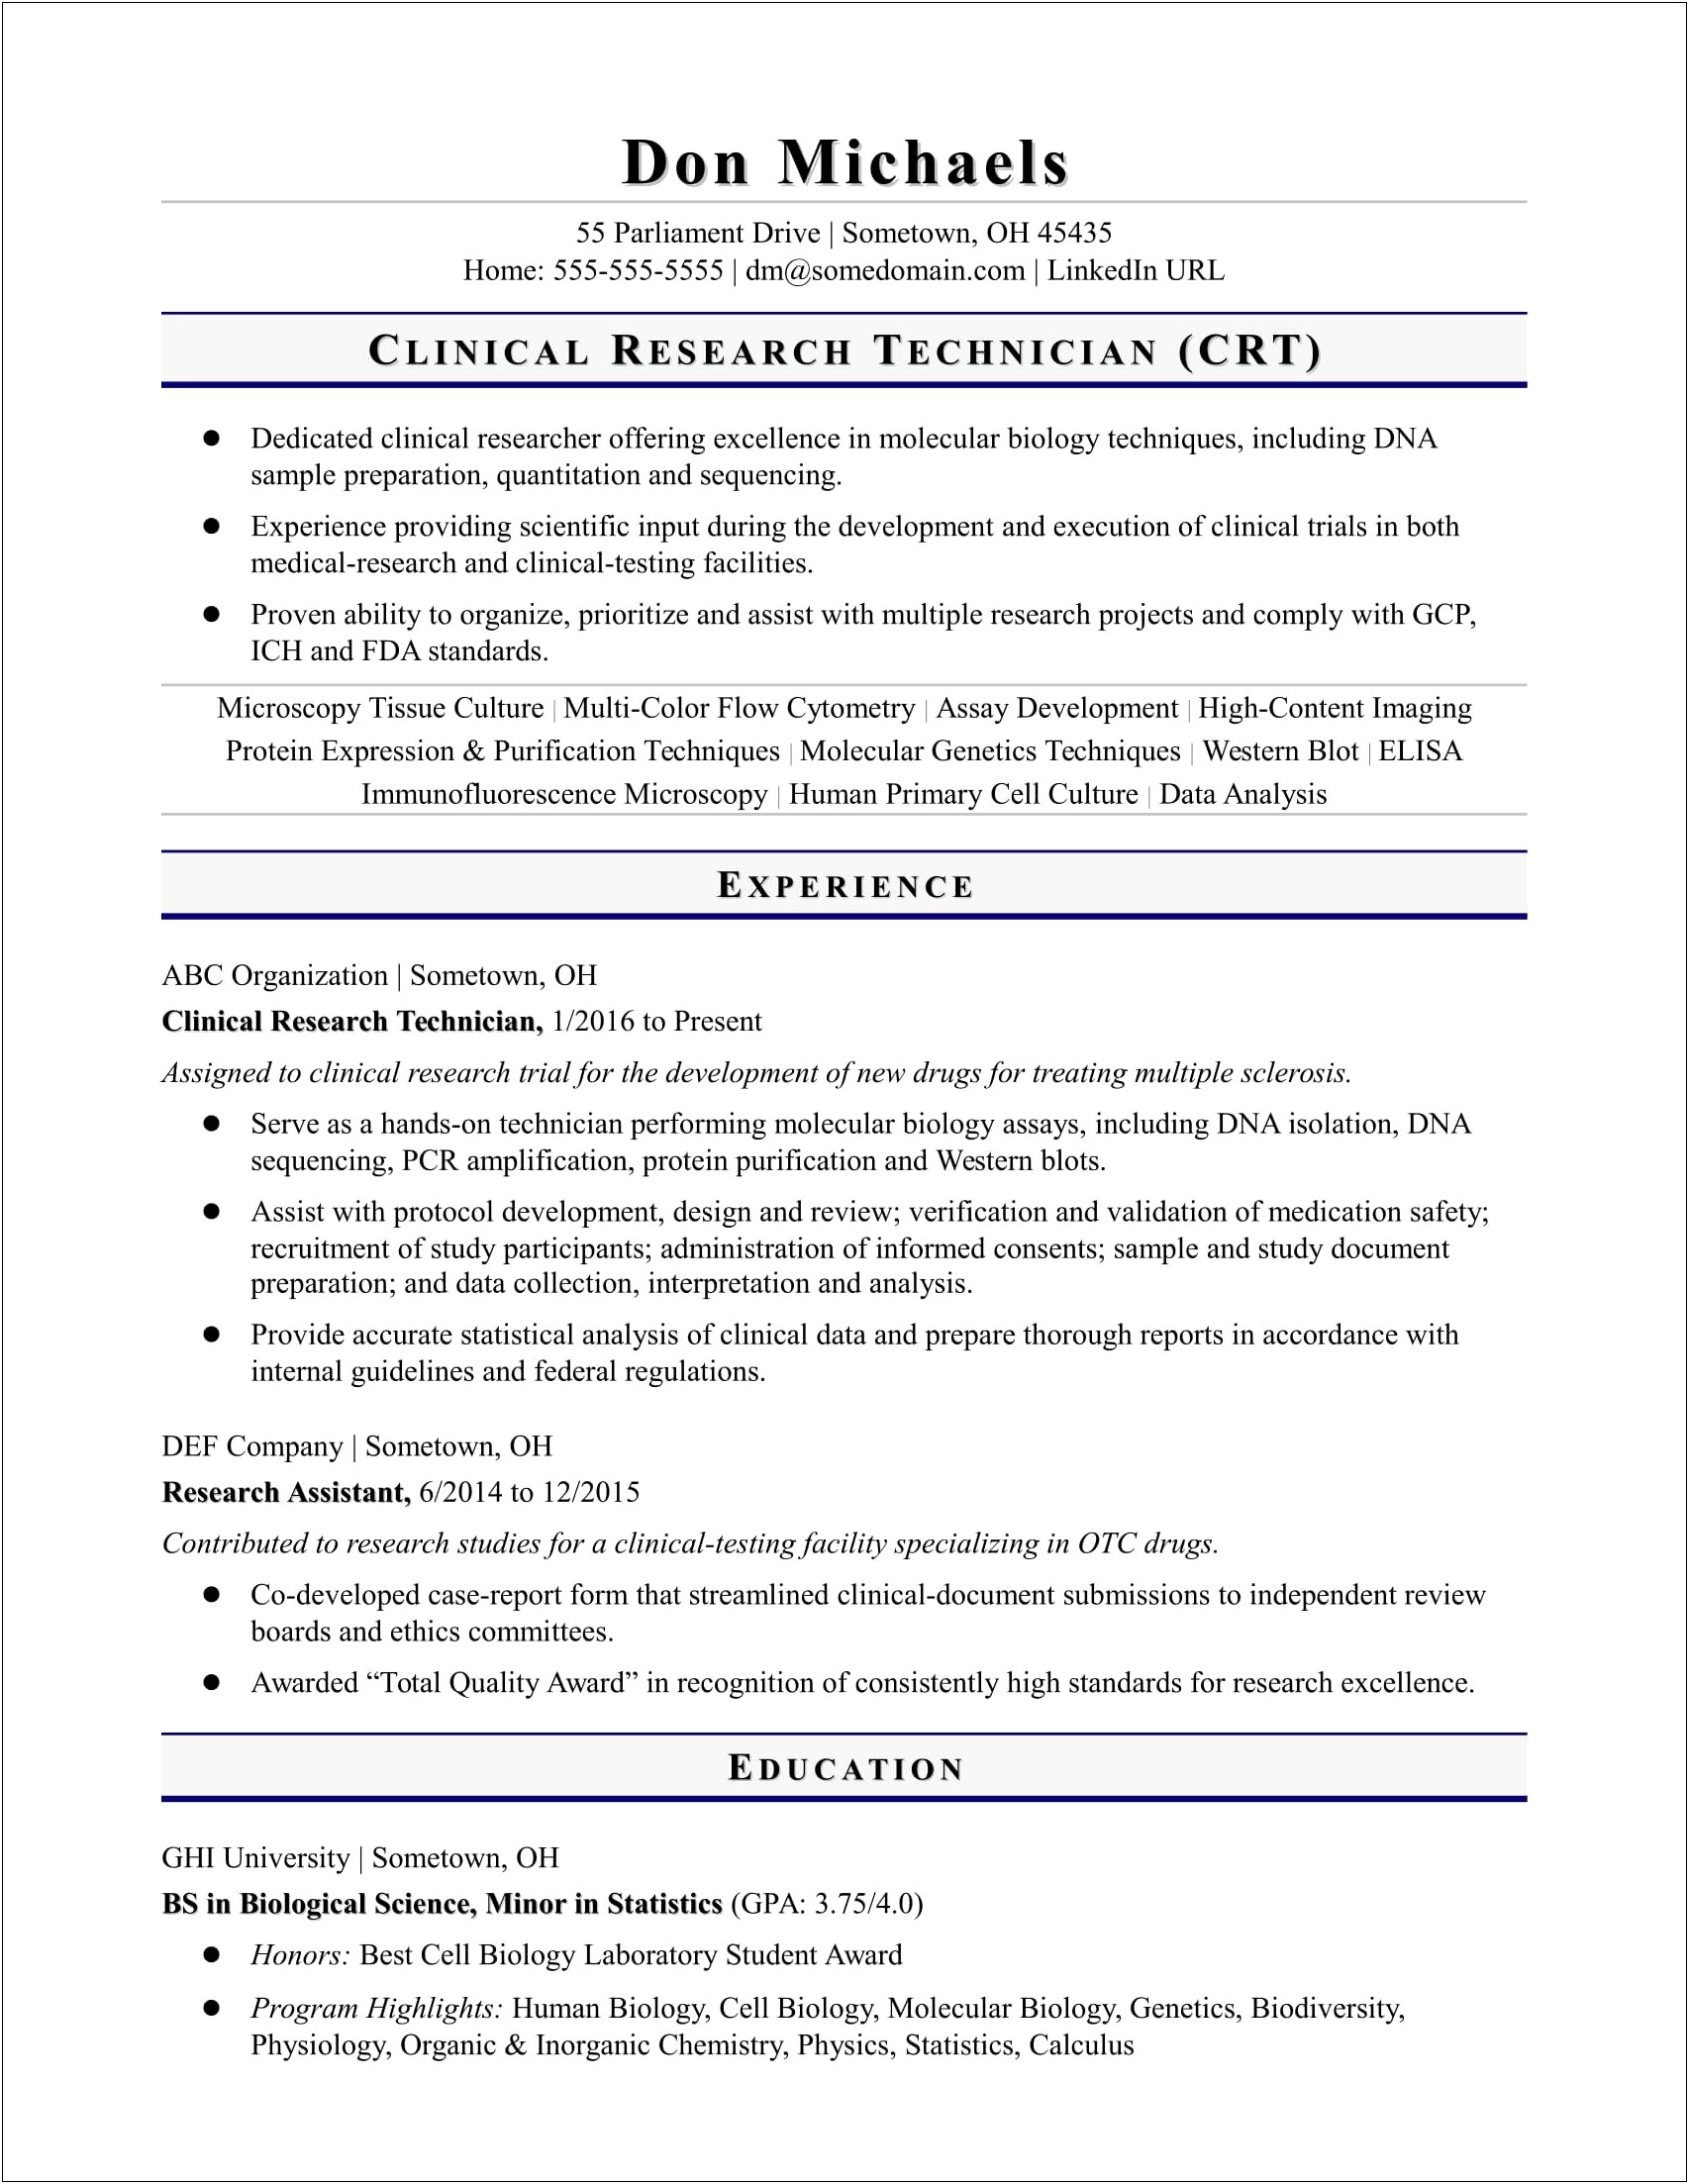 Research And Development Description On Resume